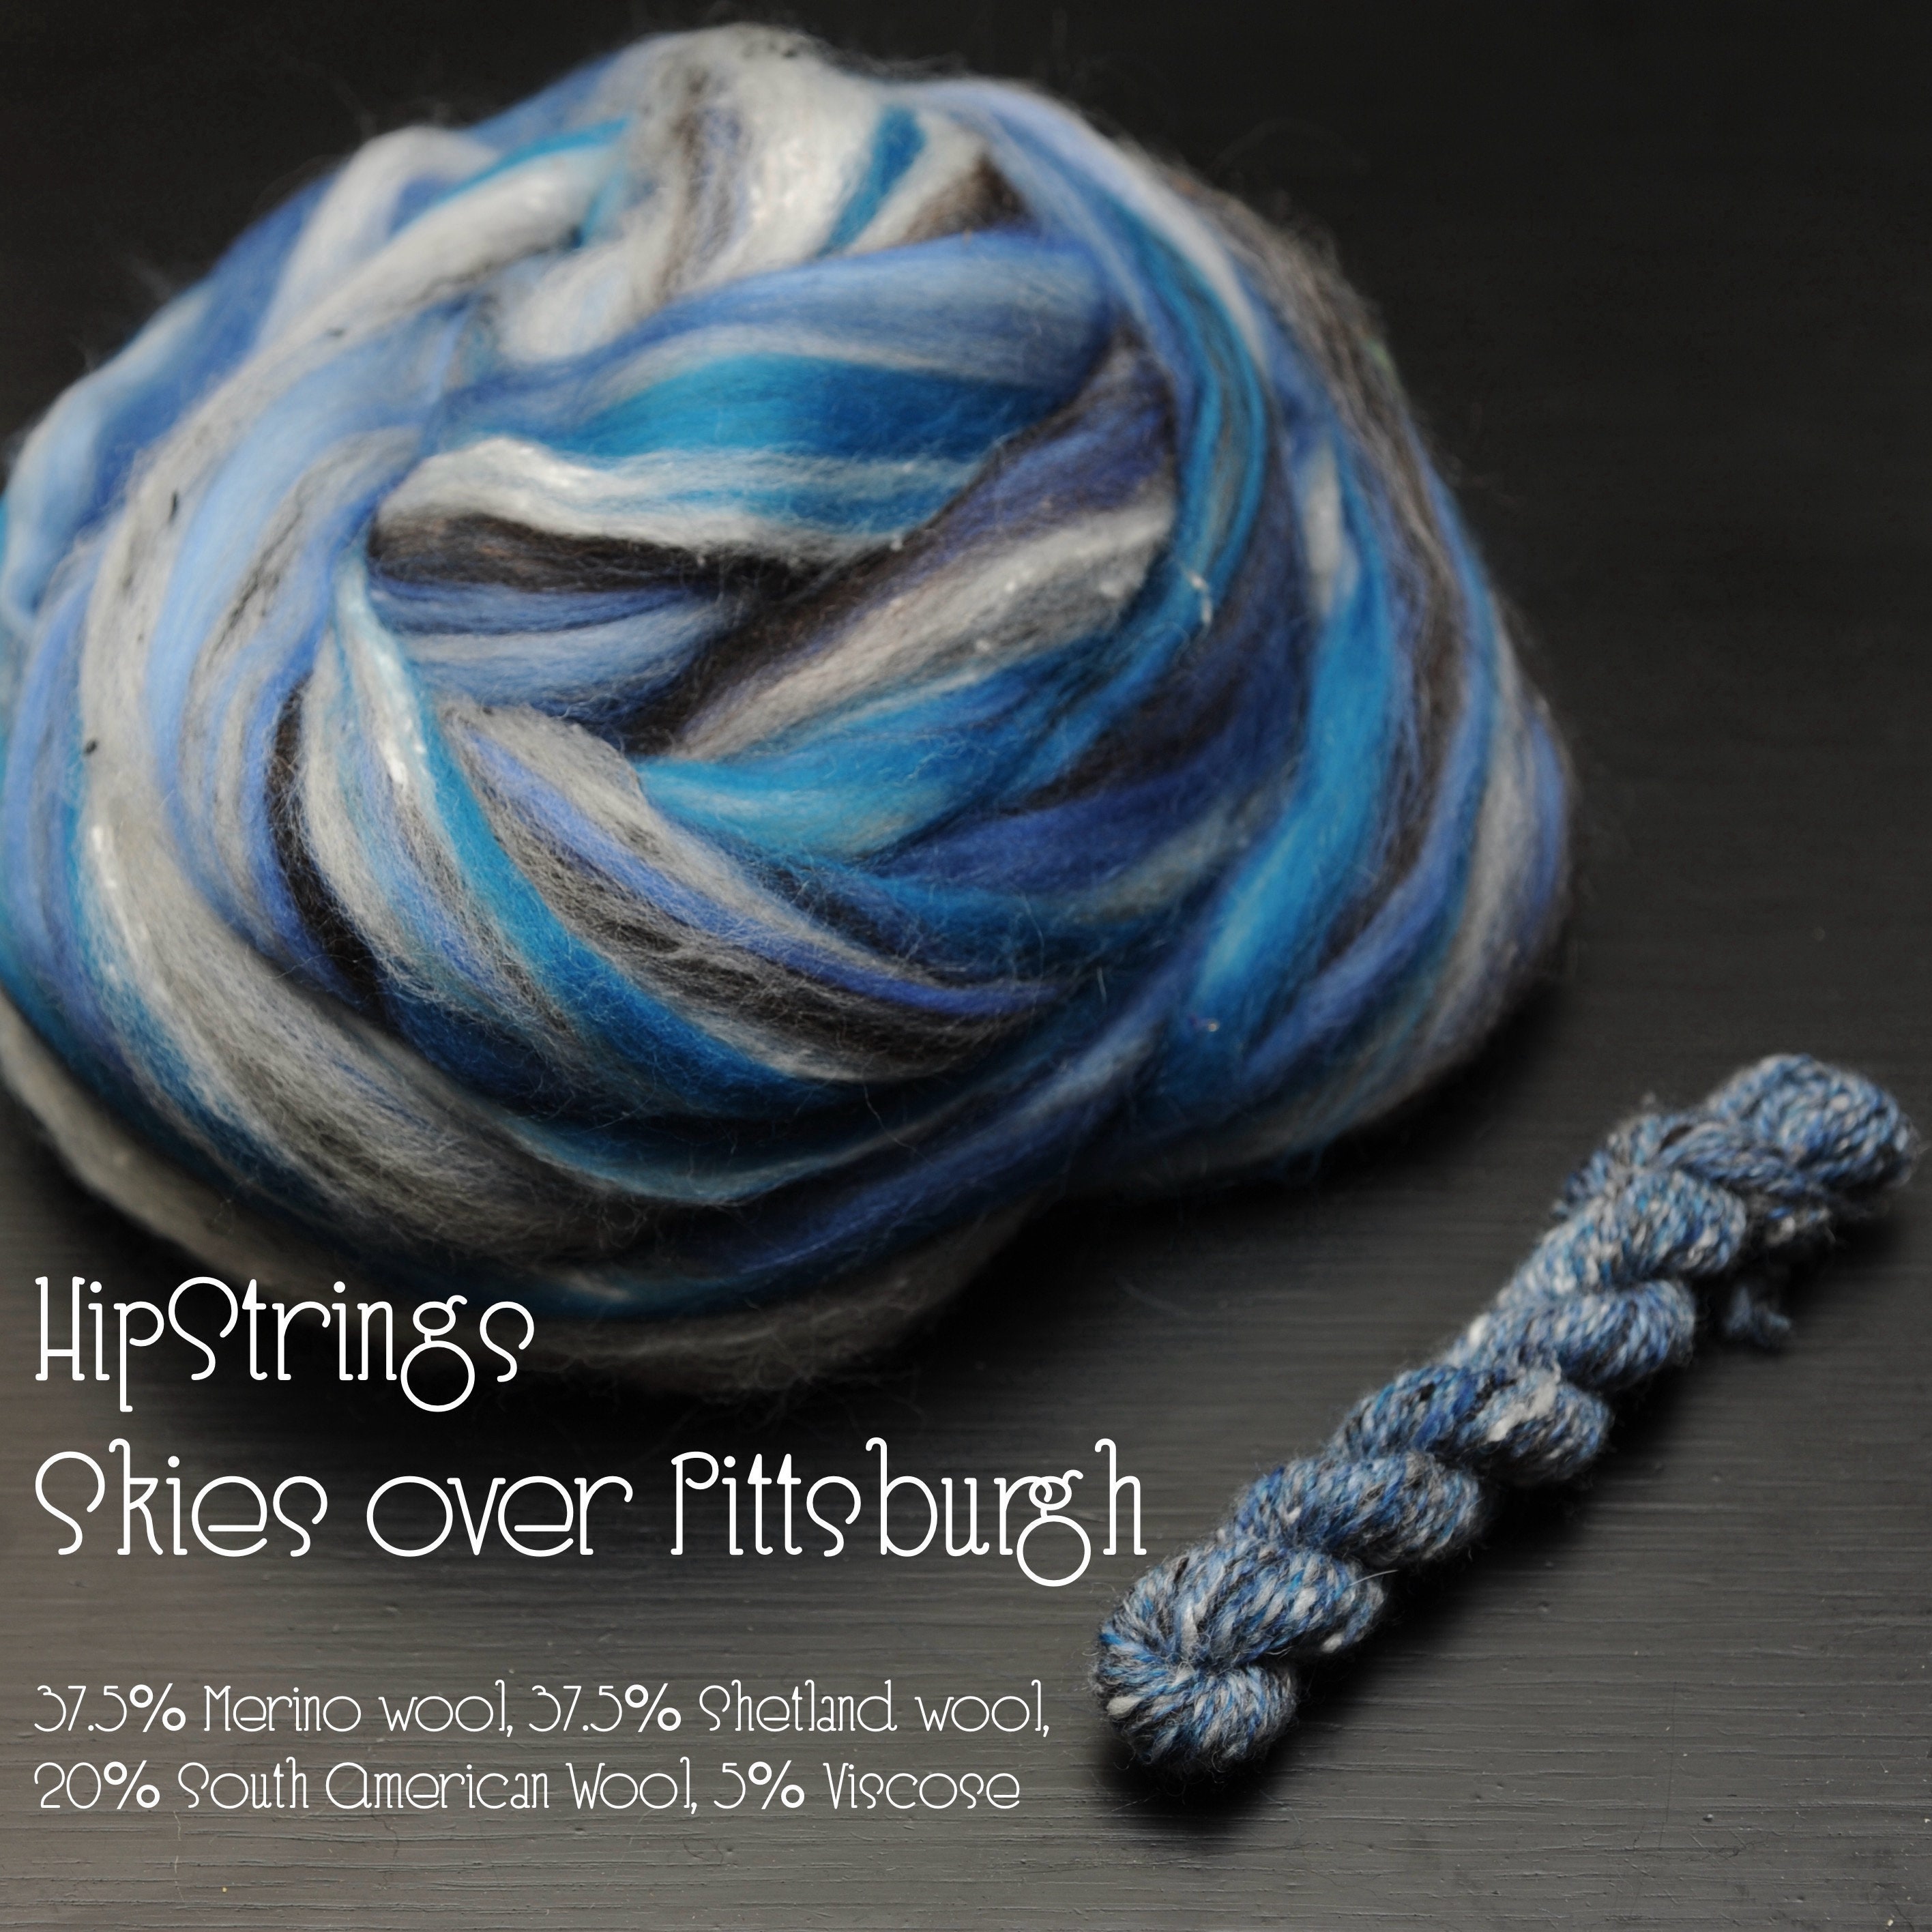 Skies Over Pittsburgh Signature Blend | Merino/Shetland/South American/Viscose Combed Wool Top - 4 Oz